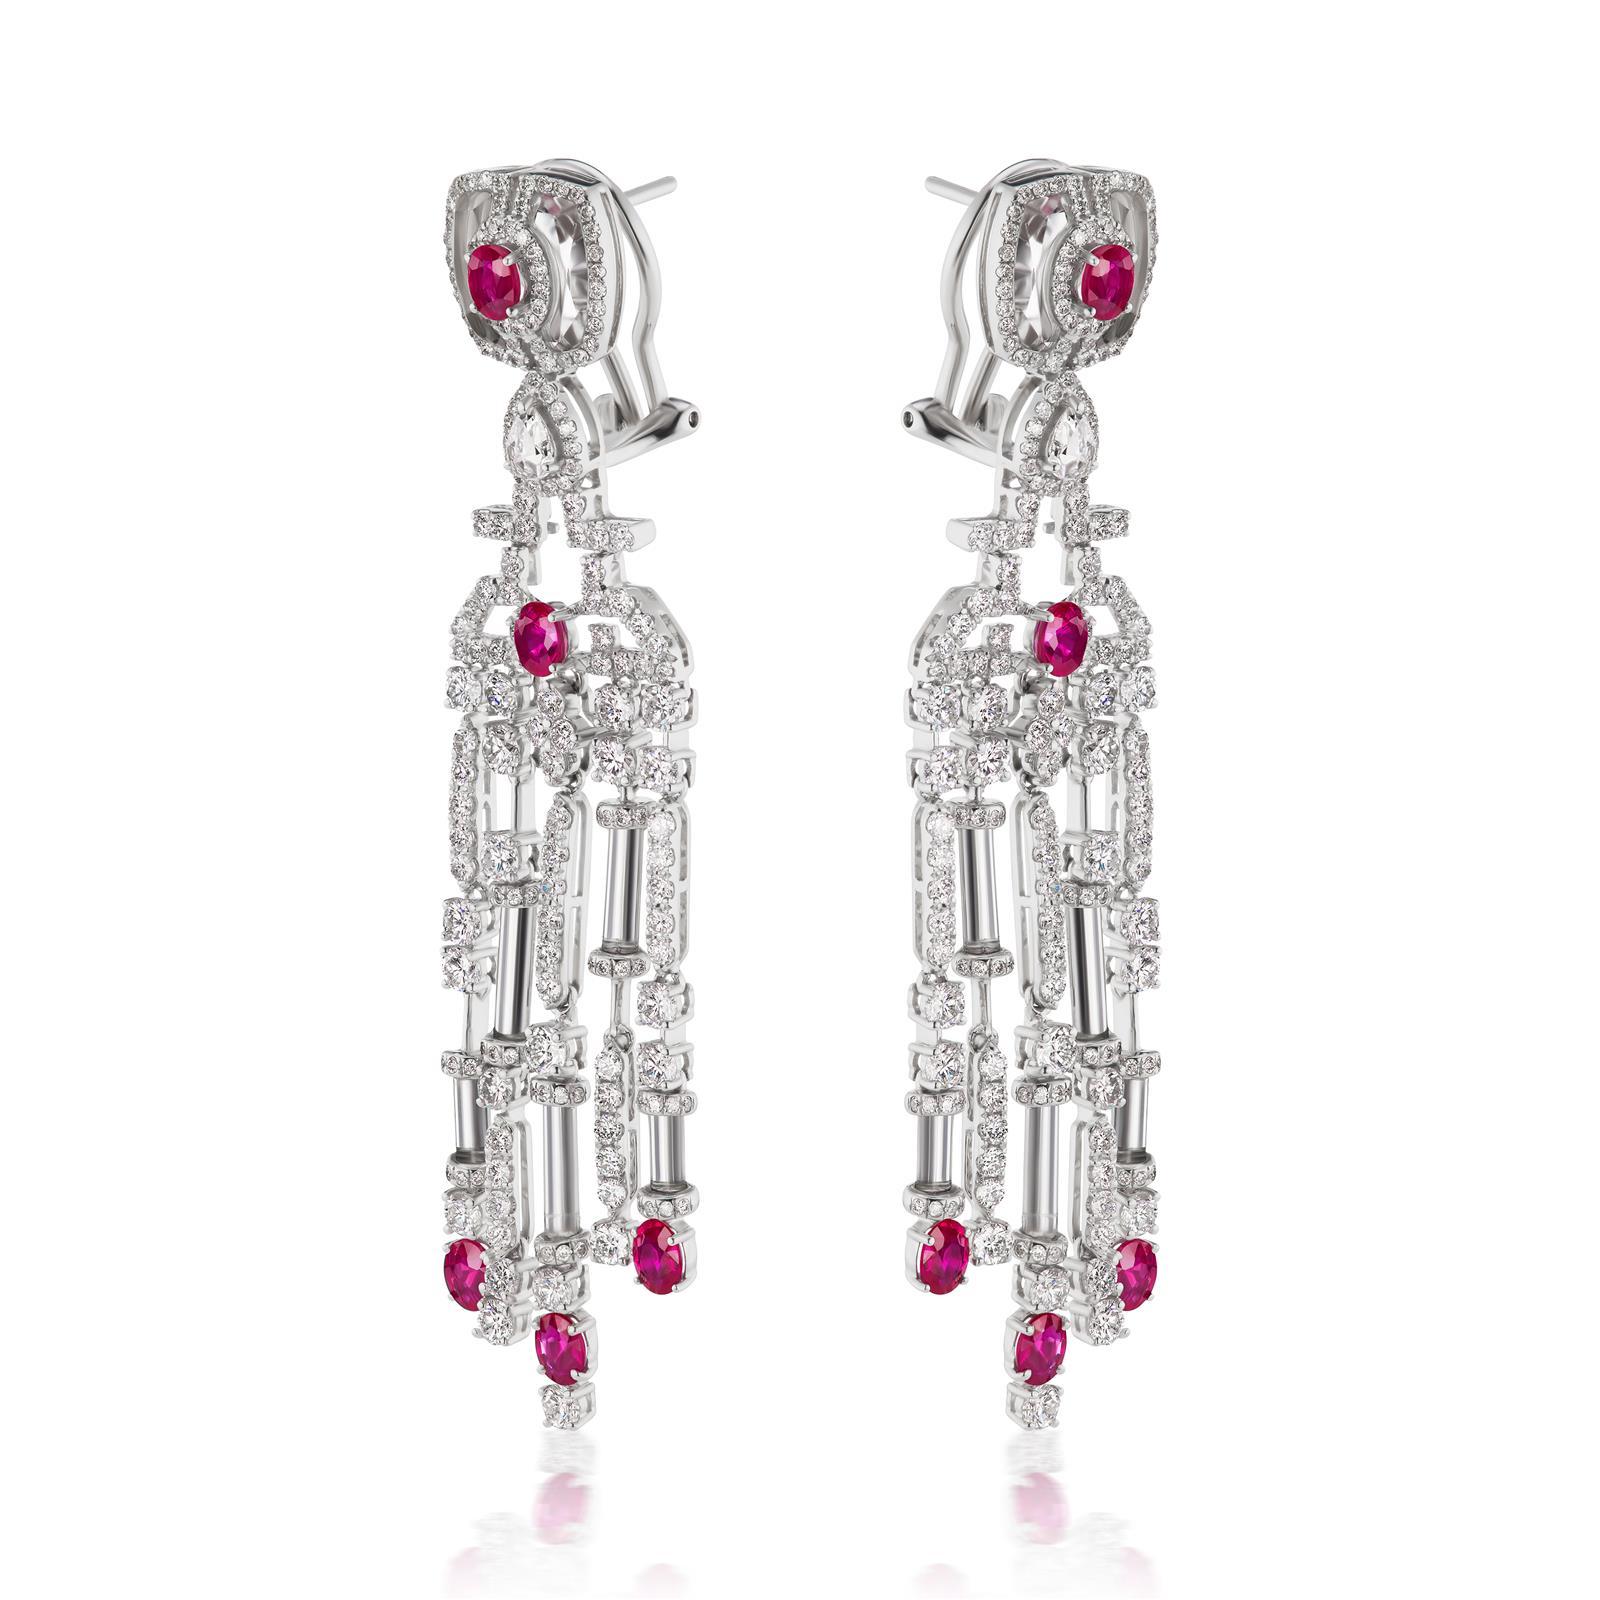 This chandelier Nigaam earring is a beauty to behold. The surmount of the earring features oval cut ruby accentuated by double halo of round diamonds and crystal on either side. The bail of the earring features pear shaped rose cut diamond in pear